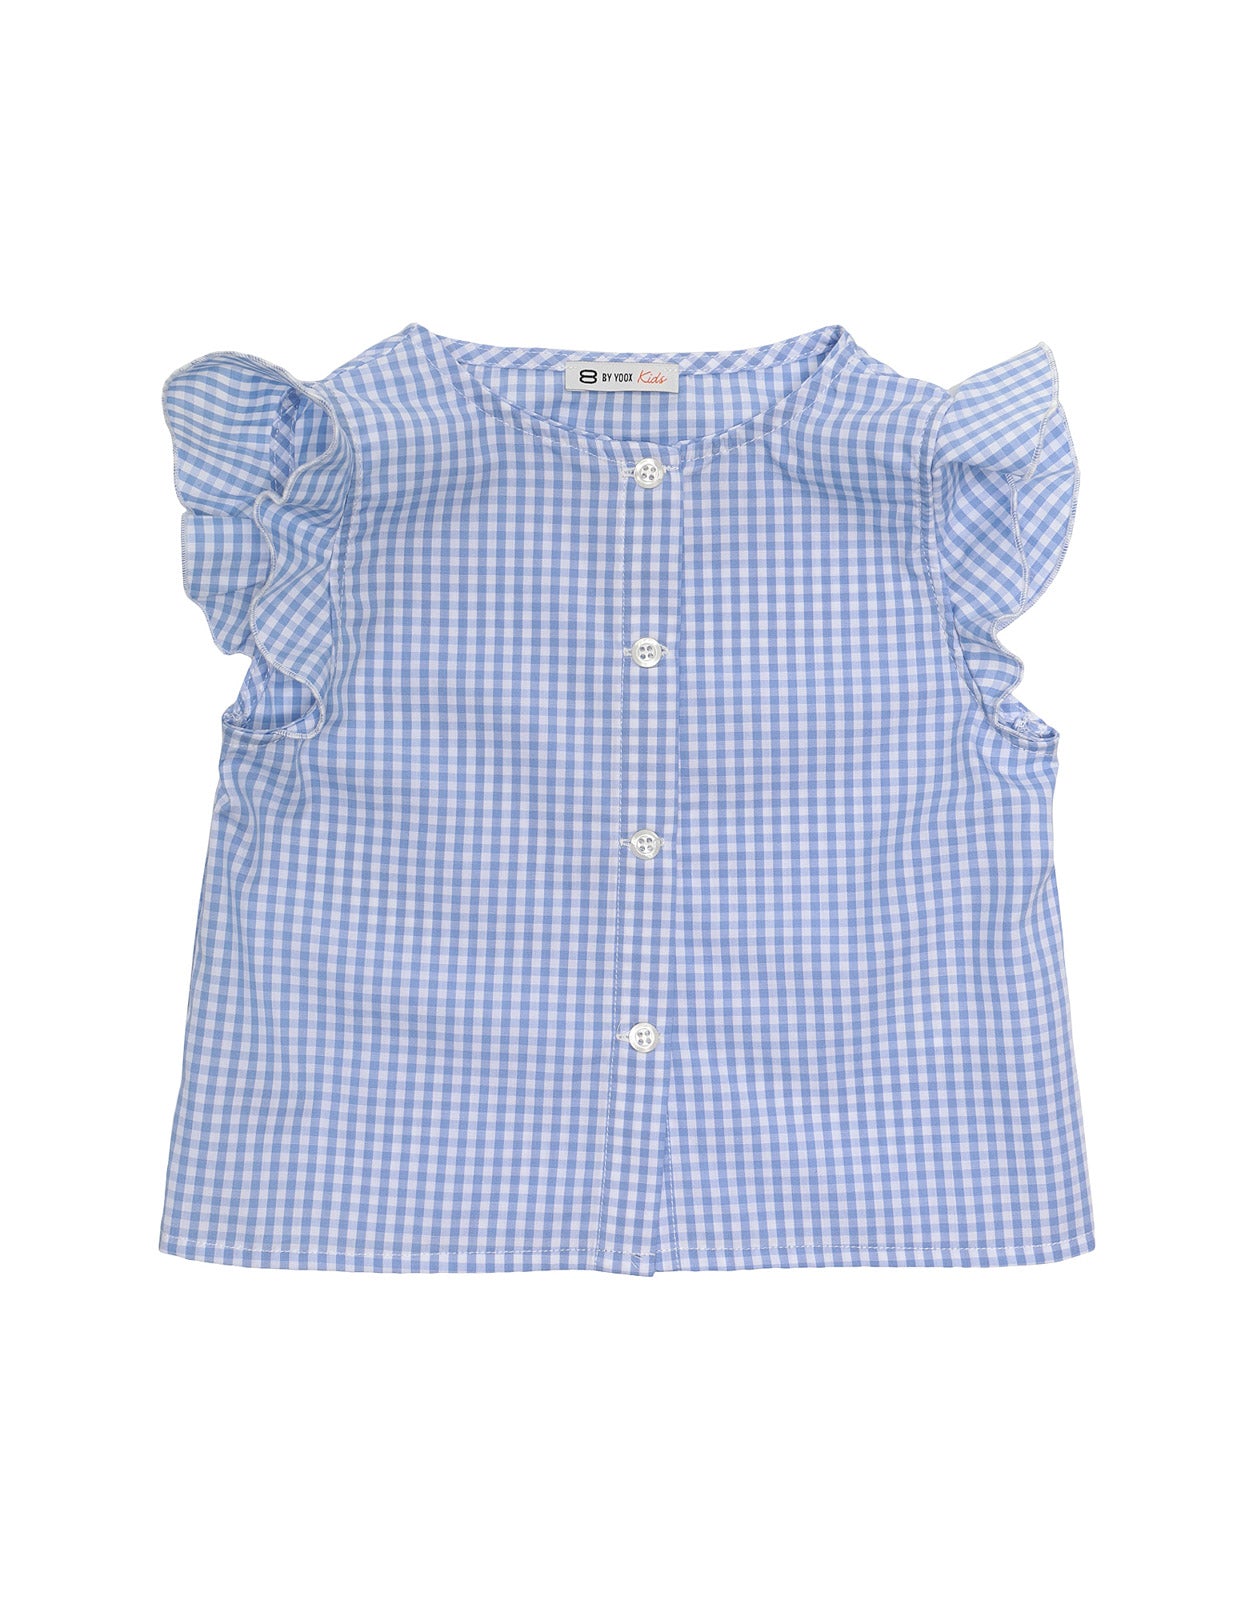 8 KIDS Top Blouse Size 3Y Gingham Pattern Ruffle Trim Made in Italy gallery main photo